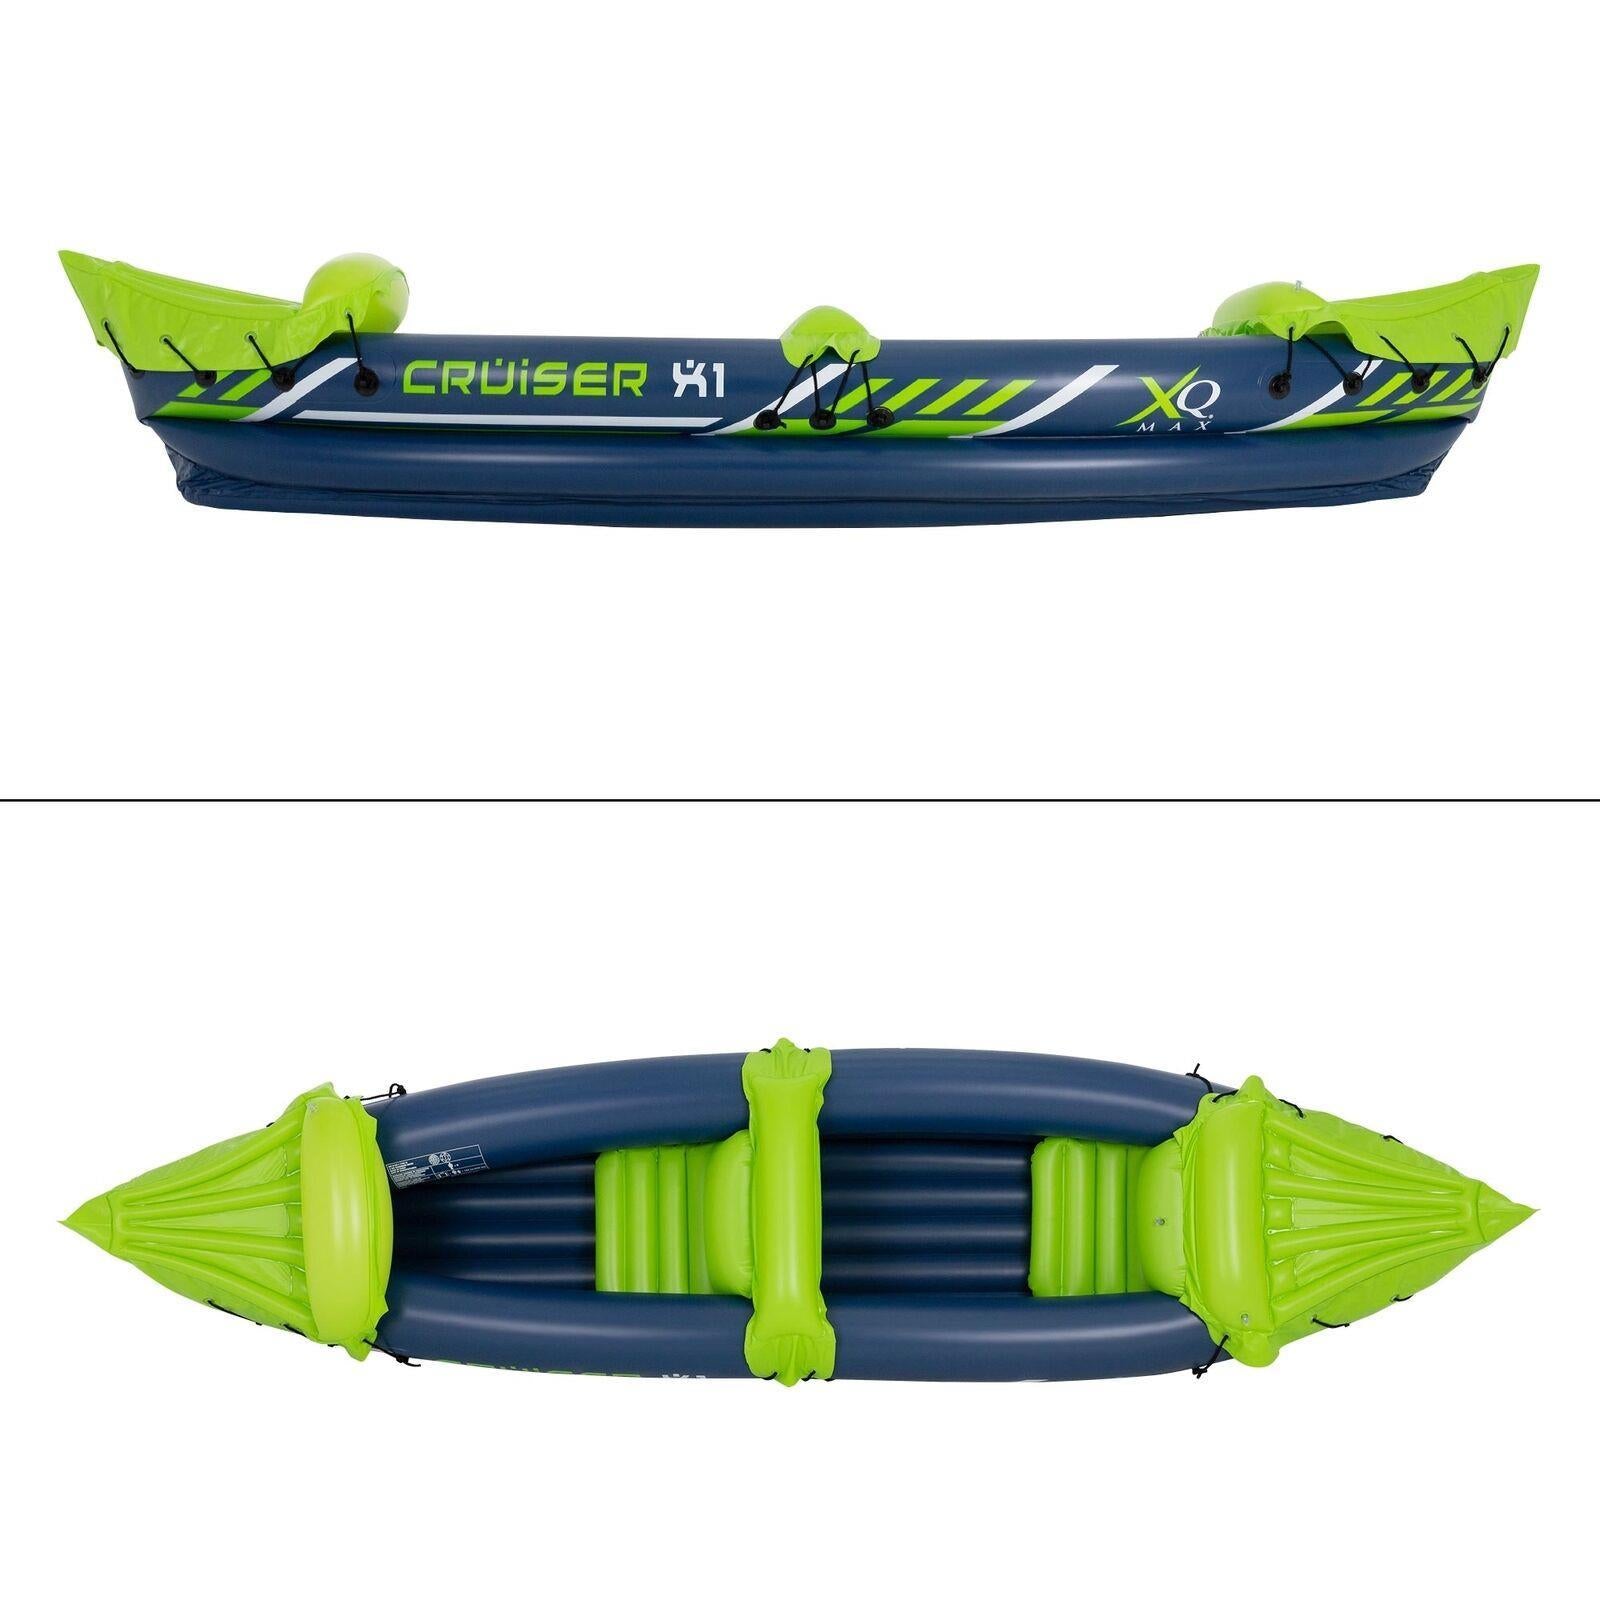 GEEZY 2 Man Person Inflatable Canoe Kayak Dinghy Boat with Double Paddle by GEEZY - The Magic Toy Shop